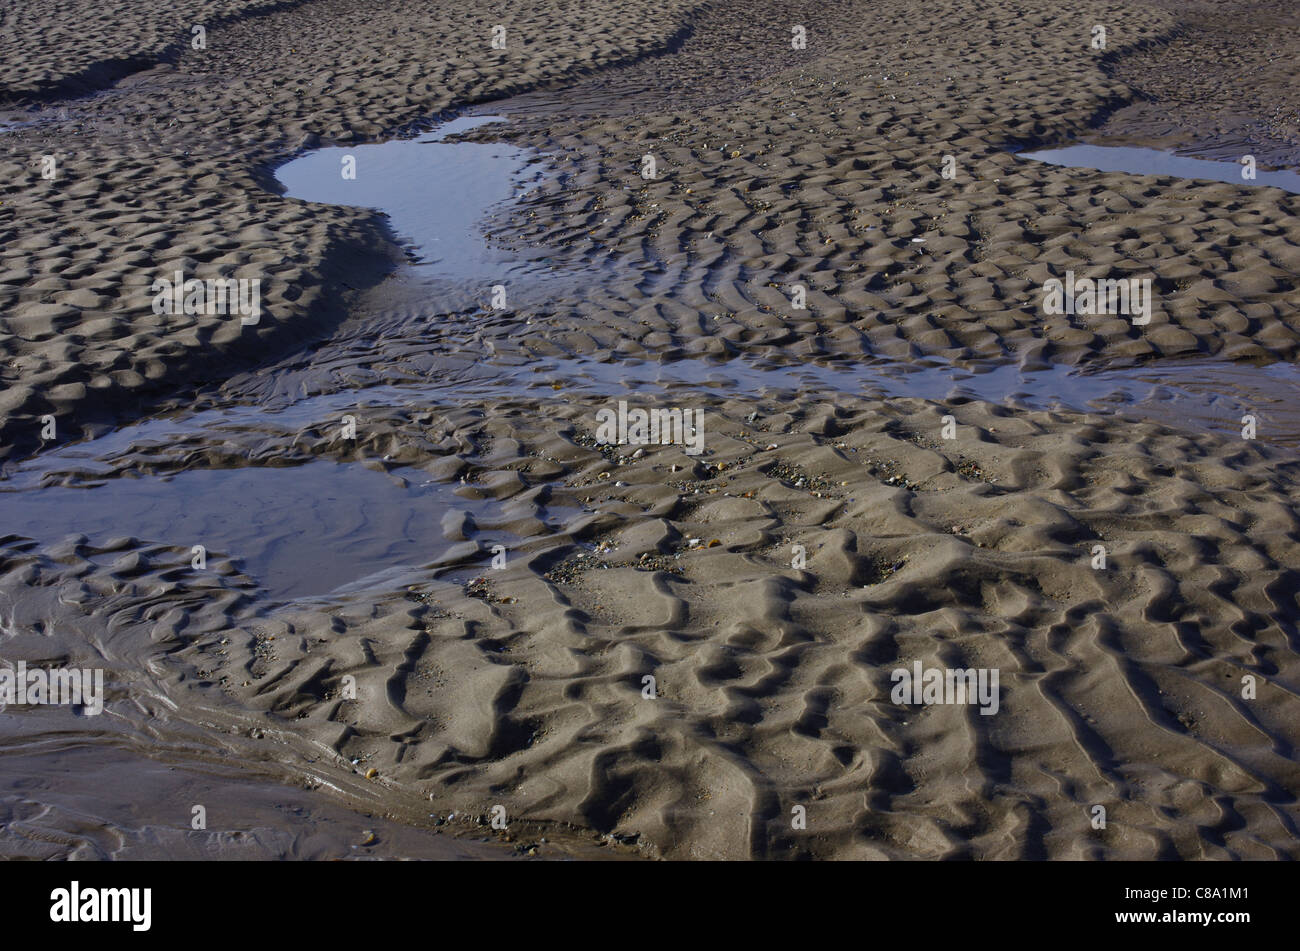 Patterns left in the sand of a tidal creek, Cymyran, Anglesey, Wales, UK. Stock Photo